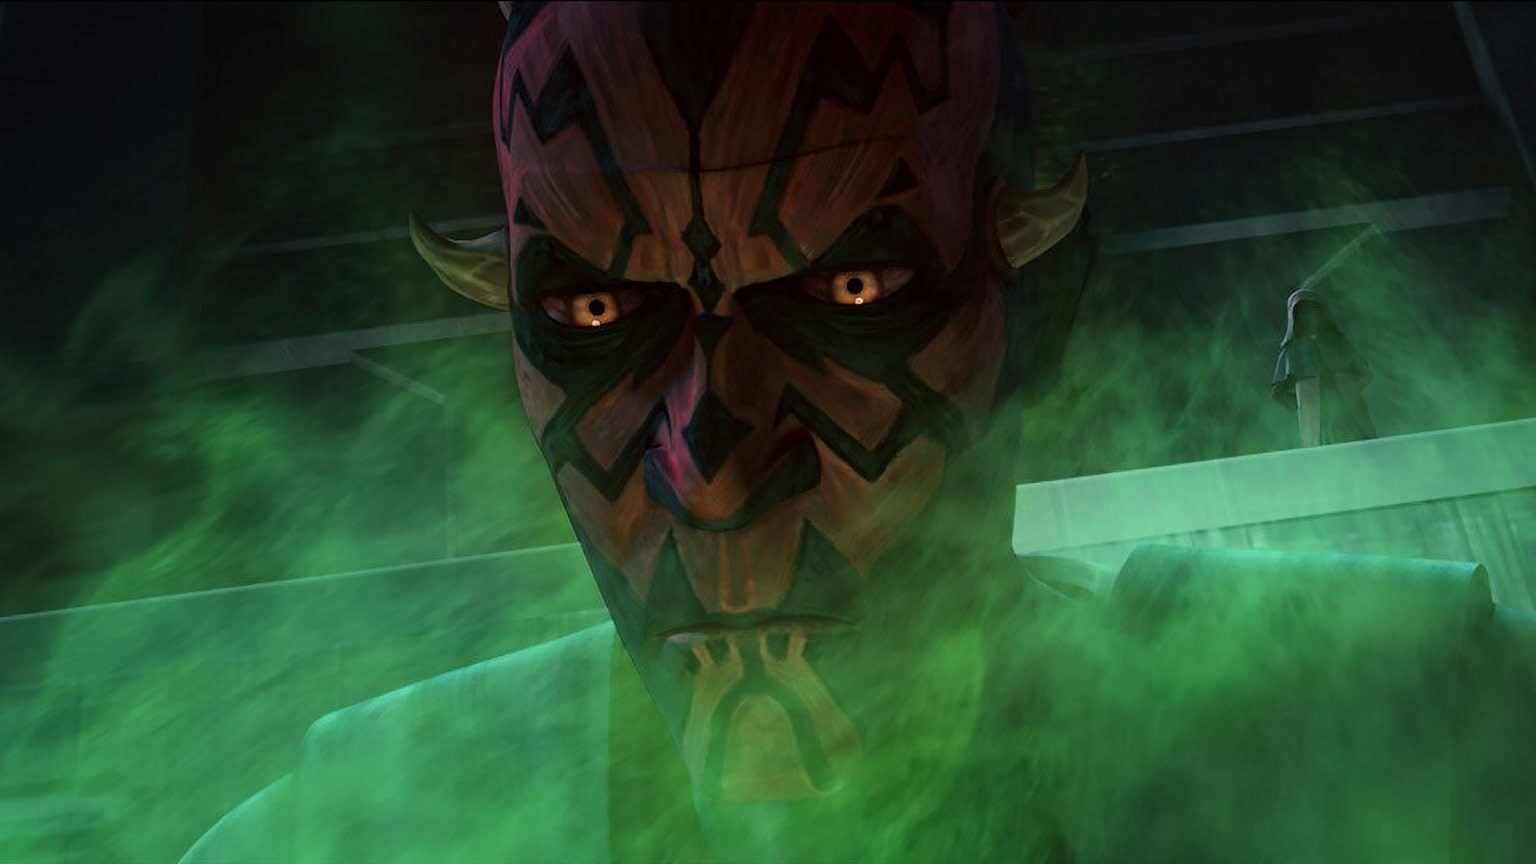 The Clone Wars Rewatch: Revenge of "The Lawless"